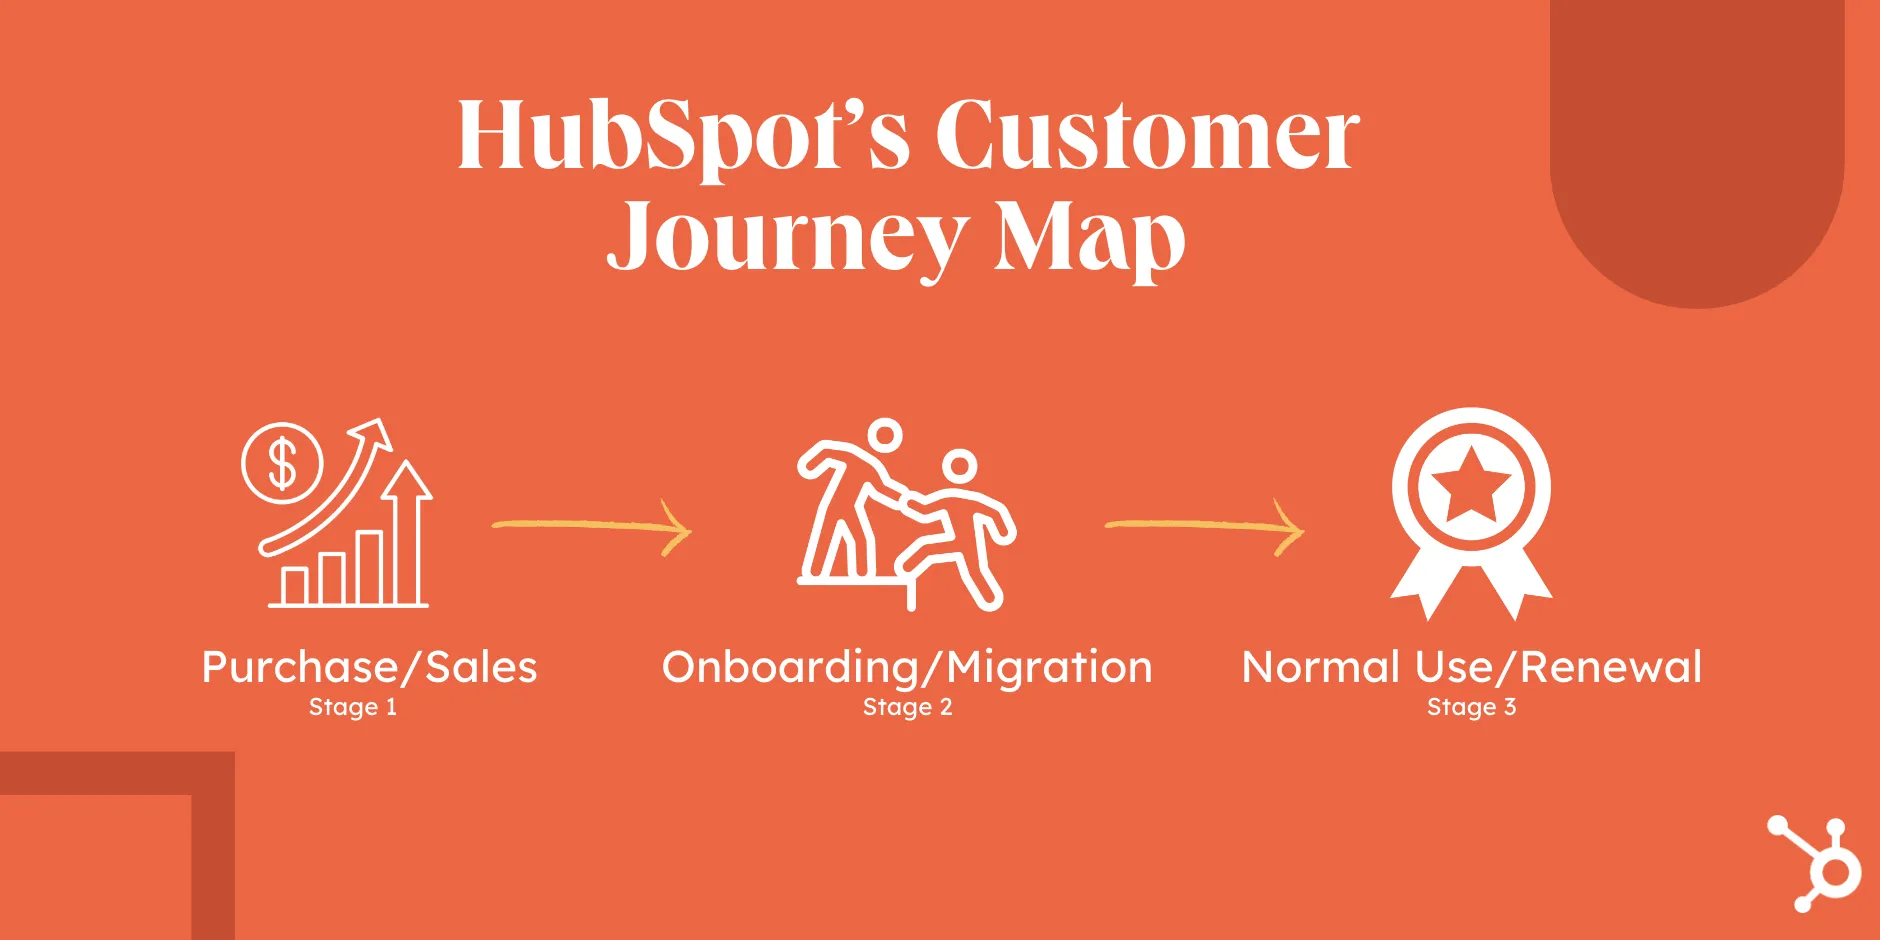 ></center></p><p>At each stage, HubSpot has a specific set of touchpoints to meet customers where they are — like using blog posts to teach customers about marketing and sales, then nurturing them slowly toward a paid subscription. Within later stages, there are several “moments” such as comparing tools, sales negotiations, technical setup, etc.</p><p>The stages may not be the same for you — in fact, your brand will likely develop a set of unique stages of the customer journey. But where do you start? Let’s discuss creating your customer journey map.</p><p>A customer journey map is a visual representation of the customer's experience with a company. It also provides insight into the needs of potential customers at every stage of this journey and the factors that directly or indirectly motivate or inhibit their progress.</p><p>The business can then use this information to improve the customer experience, increase conversions, and boost customer retention.</p><p>The customer journey map is not to be confused with a UX journey map. But, for clarity, let’s distinguish these two below.</p><h2>What is UX journey mapping?</h2><p>A UX journey map represents how a customer experiences their journey toward achieving a specific goal or completing a particular action.</p><p>For example, the term “UX journey mapping” can be used interchangeably with the term “customer journey mapping” if the goal being tracked is the user’s journey toward purchasing a product or service.</p><p>However, UX journey mapping can also be used to map the journey (i.e., actions taken) towards other goals, such as using a specific product feature.</p><h2>Why is customer journey mapping important?</h2><p>While the customer journey might seem straightforward — the company offers a product or service, and customers buy it — for most businesses, it typically isn’t.</p><p>In reality, it’s a complex journey that begins when the customer becomes problem-aware (which might be long before they become product-aware) and then moves through an intricate process of further awareness, consideration, and decision-making.</p><p>The customer is also exposed to multiple external factors (competitor ads, reviews, etc.) and touchpoints with the company (conversations with sales reps, interacting with content, viewing product demos, etc.).</p><p>Keep in mind that 80% of customers consider their experience with a company to be as important as its products.</p><p>By mapping this journey, your marketing, sales , and service teams can understand, visualize, and gain insight into each stage of the process.</p><p>You can then decrease friction along the way and make the journey as helpful and delightful as possible for your leads and customers. Customer journey mapping allows you to understand your customers’ motivations, pain points, and needs — resulting in an increased ability to provide solutions. Customers are 2.4x more likely to stick with a brand when their problems are solved quickly, so don’t miss out on the power of customers.</p><h2>What data is necessary for customer journey mapping?</h2><p>Your customer journey map isn’t just a guess based on how you think customers interact with your brand. It’s a data-driven, research-based operation that analyzes past customer behavior. So, what data should you be looking at?</p><h2>Customer Surveys and Interviews</h2><p>What better way to find out how customers think than to ask them? Customer surveys and interviews will provide first-hand information about the stage of the customer journey, their pain points, and how they use your products to solve their problems.</p><p>Surveys and interviews are referred to as Solicited Data because you have to specifically ask customers to fill out a questionnaire and provide data. Consider sending an NPS Survey to customers or asking for feedback on social media to gather the solicited data necessary for customer journey mapping. However, surveys and interviews won’t tell the whole story. That’s where unsolicited data comes in.</p><p><center><a href=